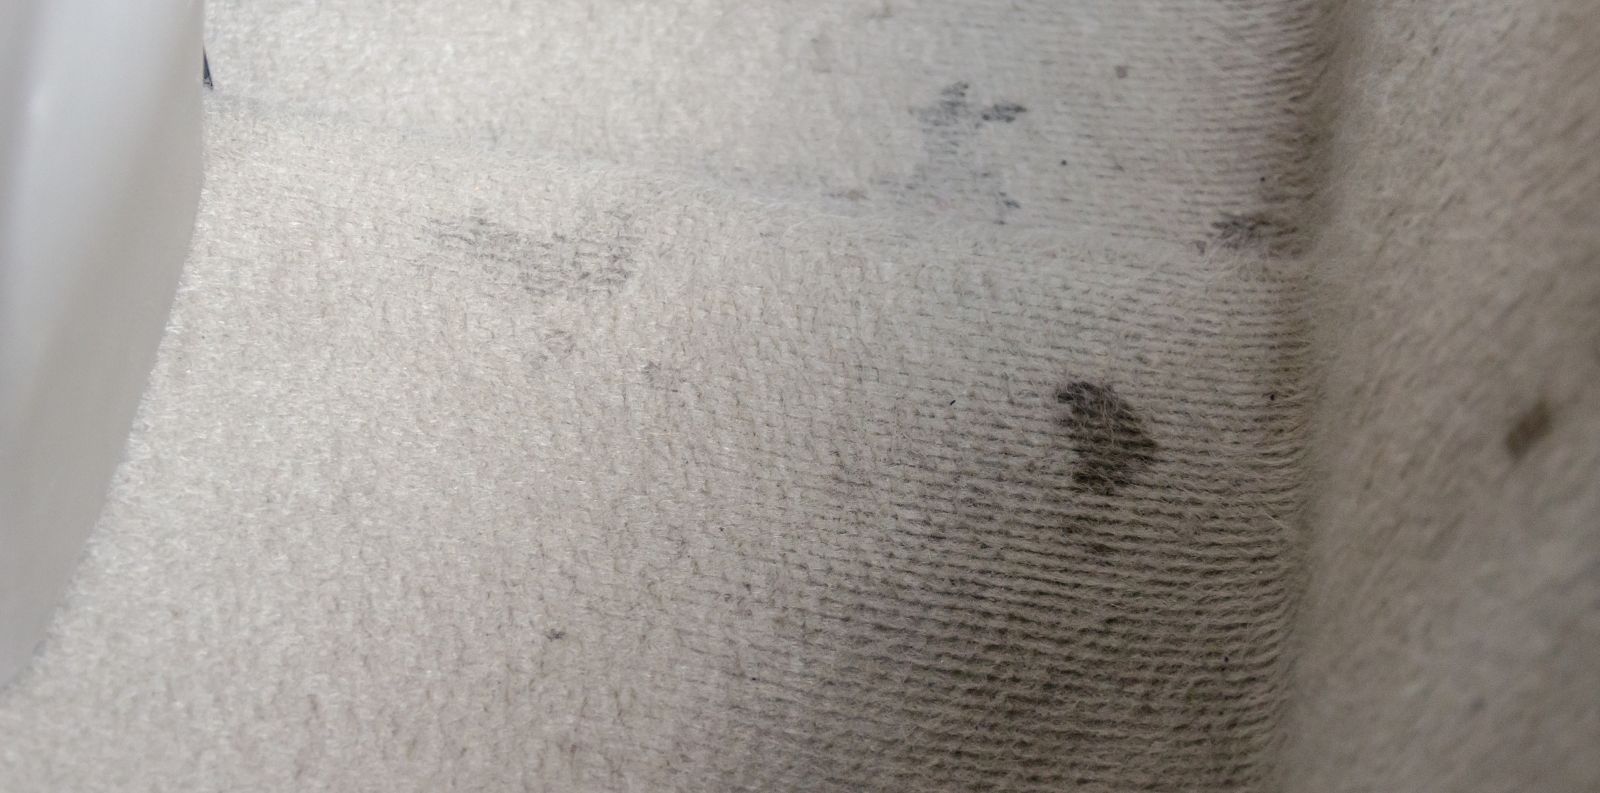 Cleaning Oil Stains from Carpet